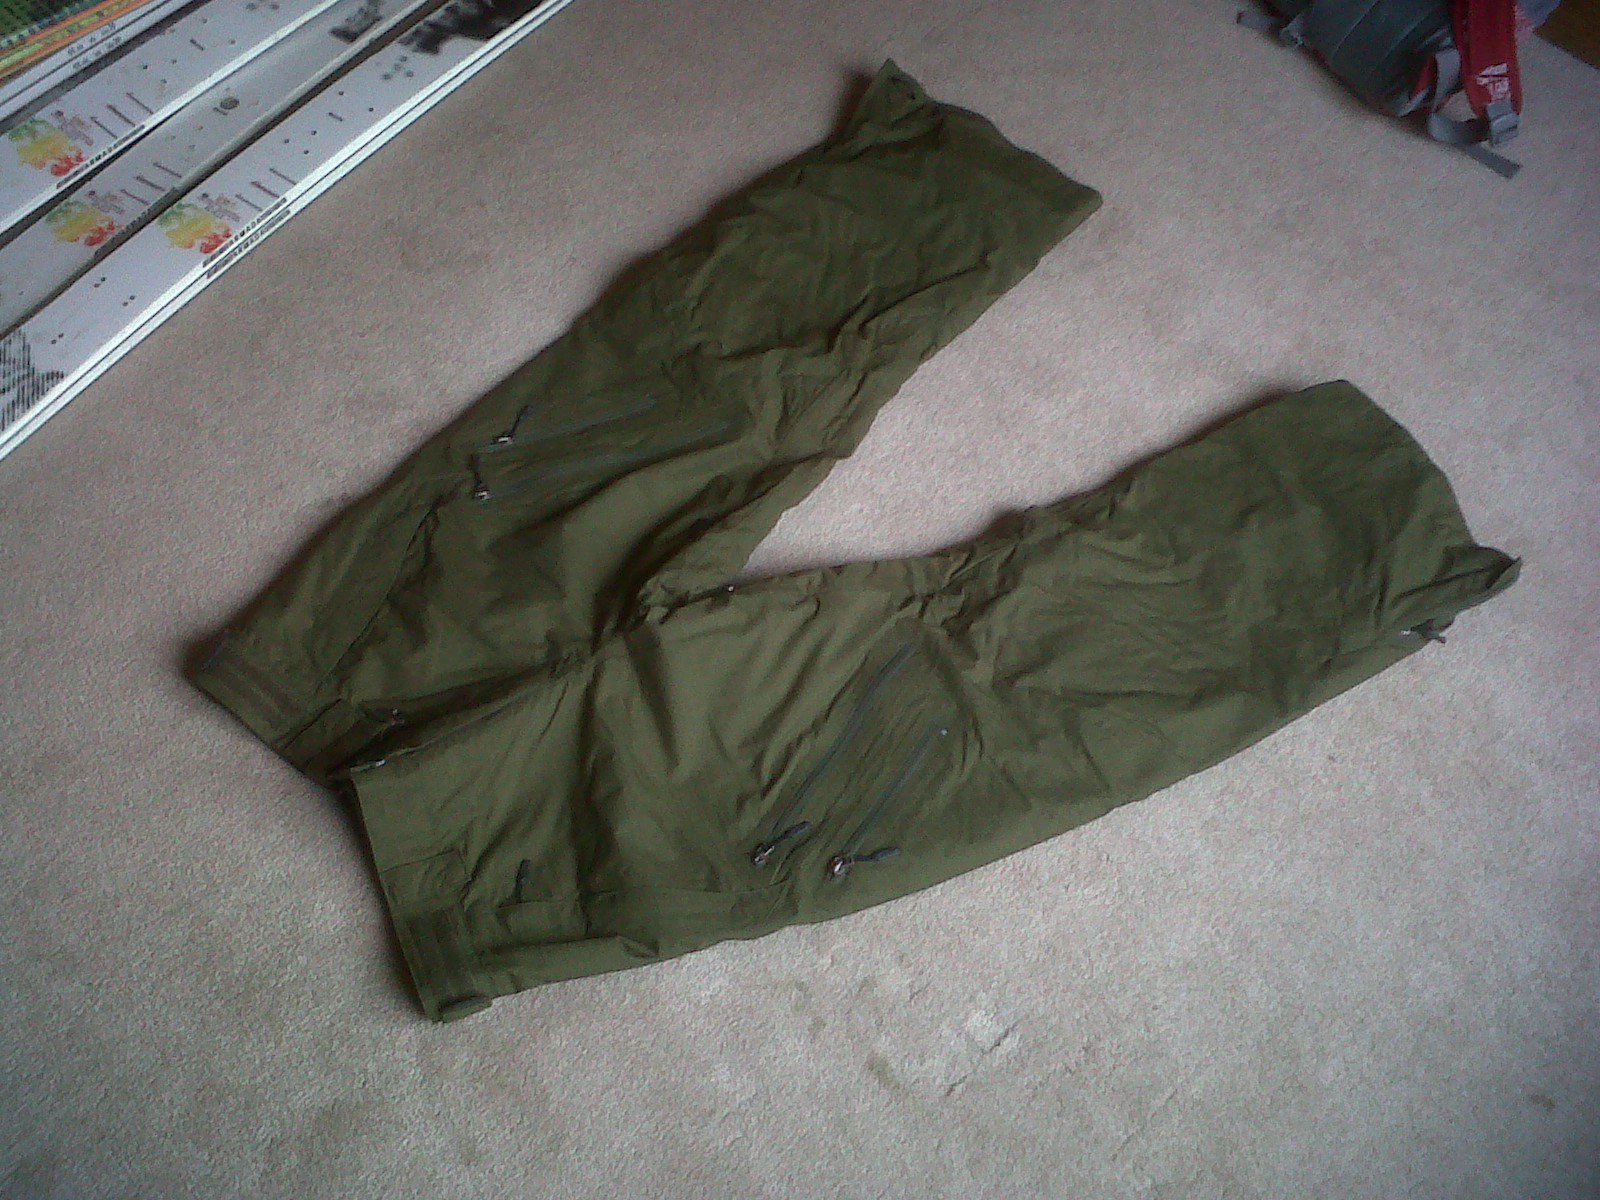 Oakley pants for sale.. check thread